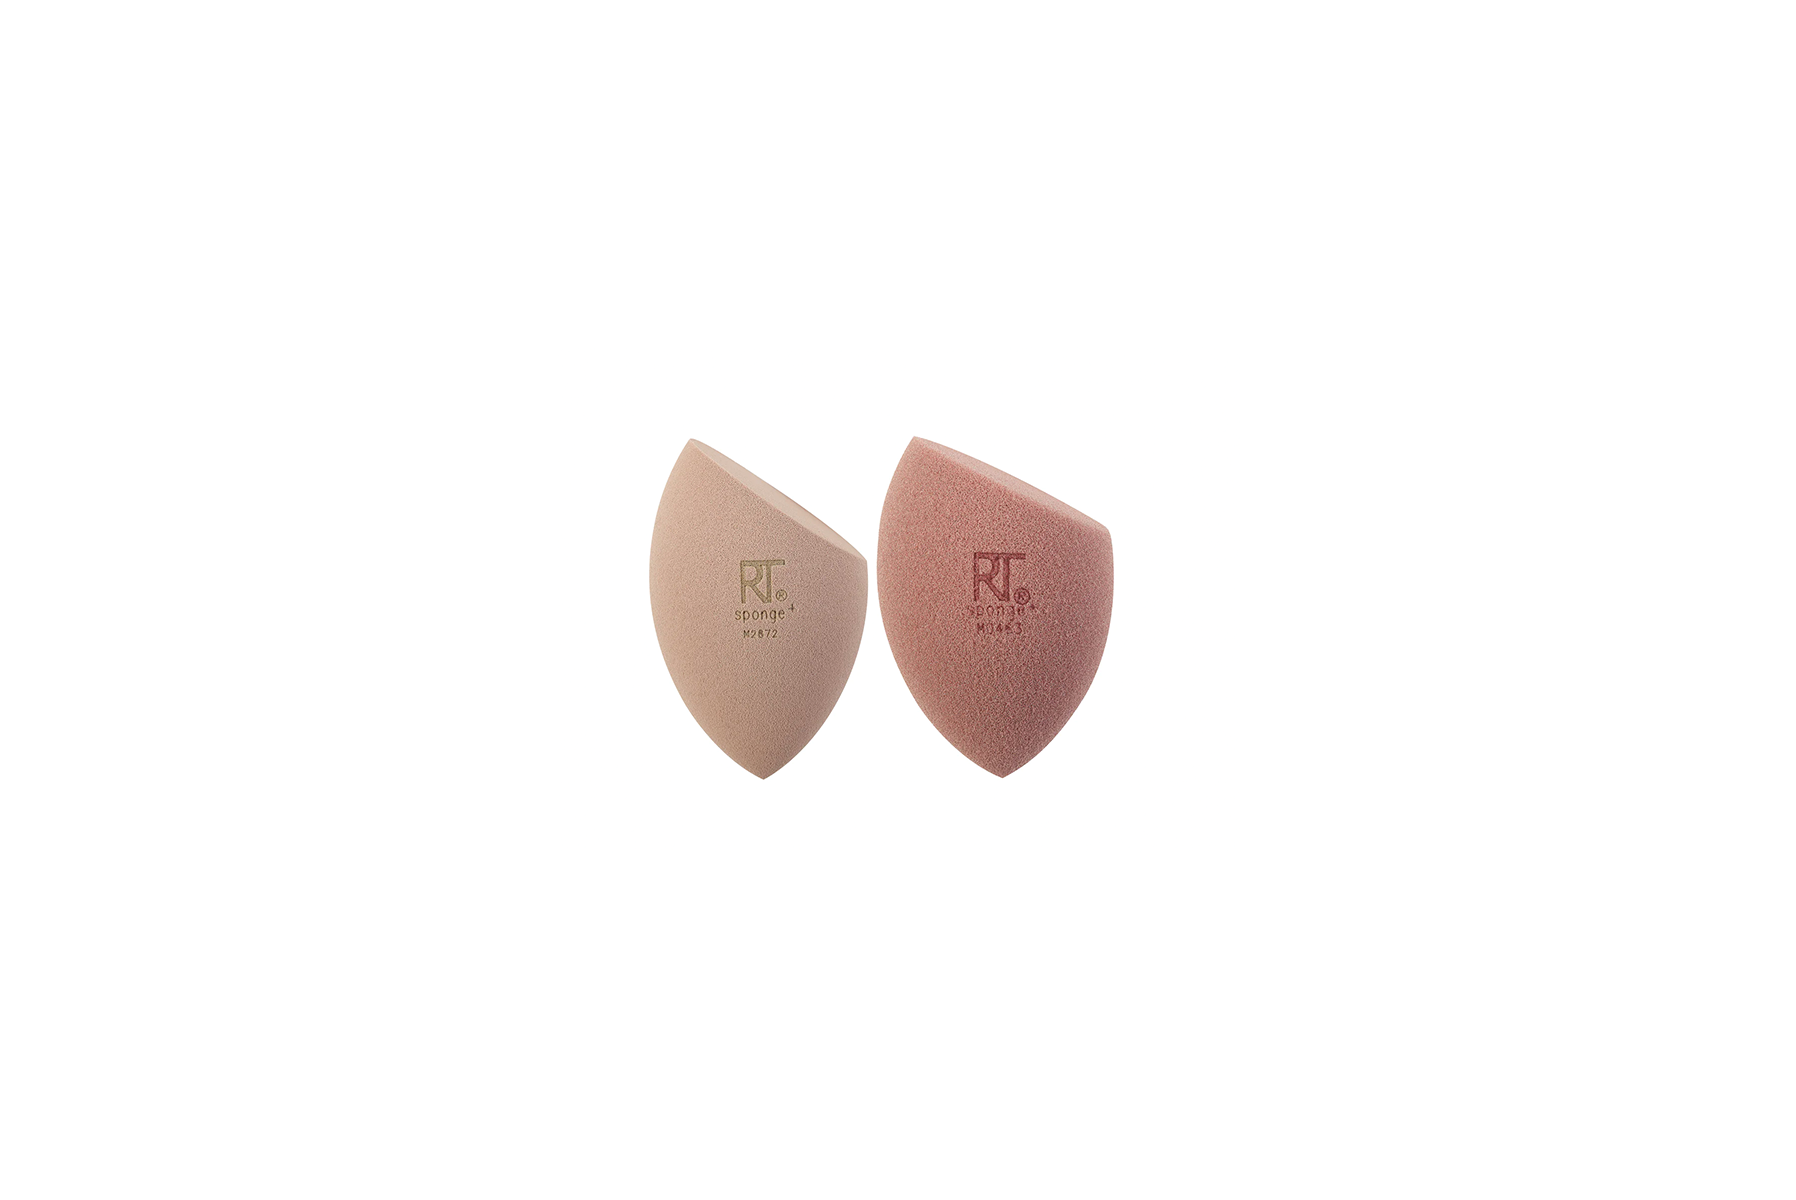 New Nudes Real Reveal Sponge Duo